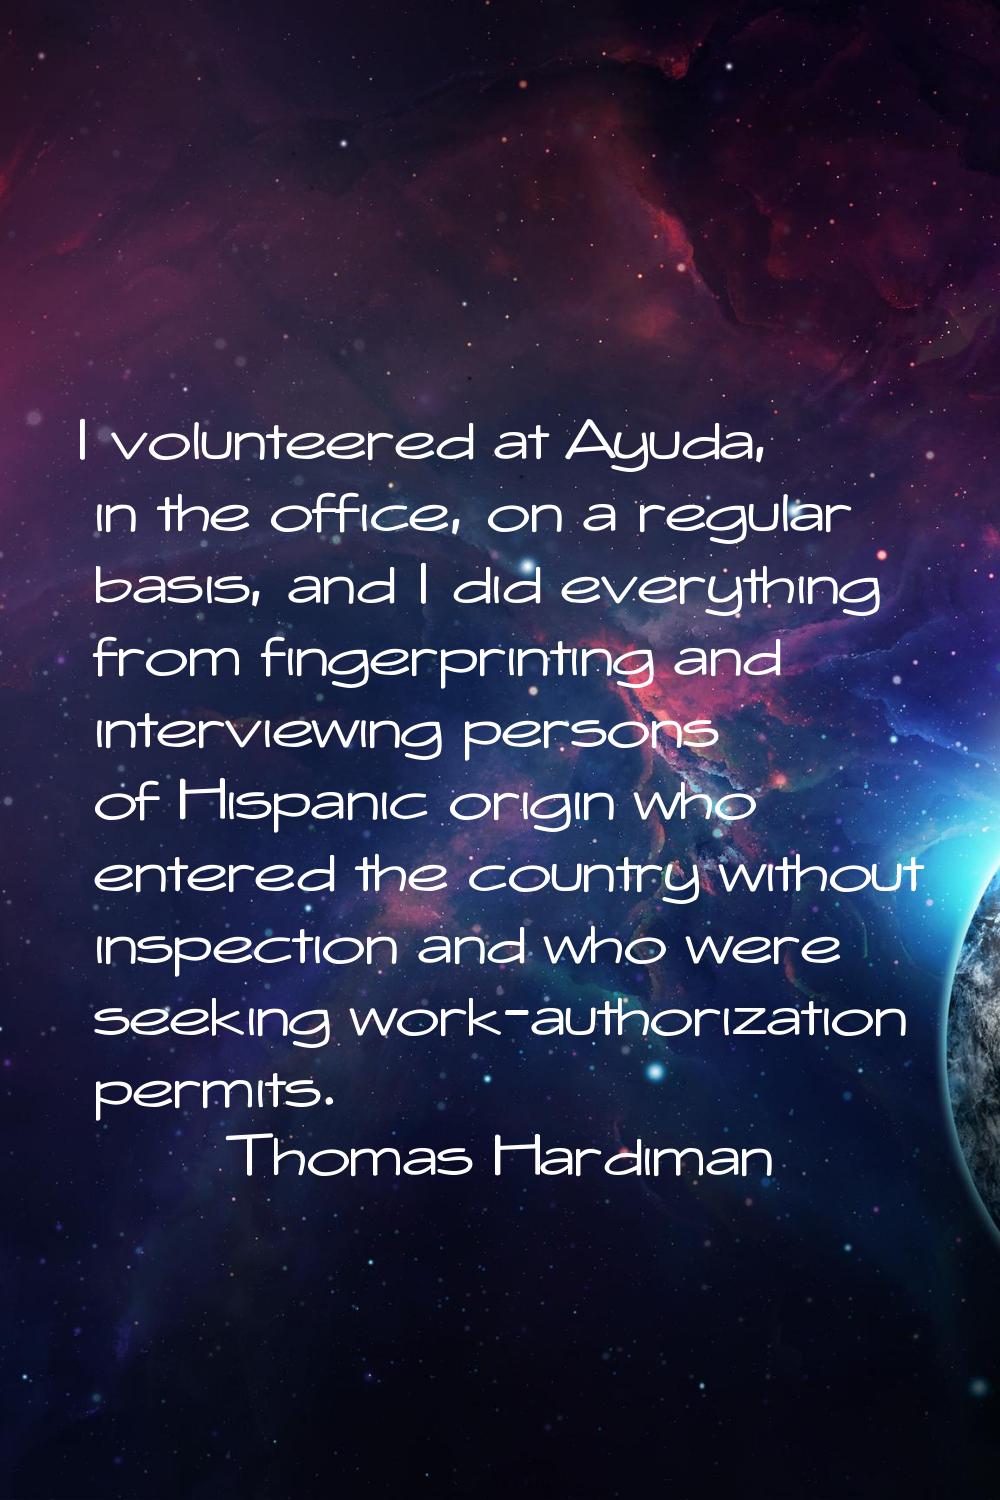 I volunteered at Ayuda, in the office, on a regular basis, and I did everything from fingerprinting